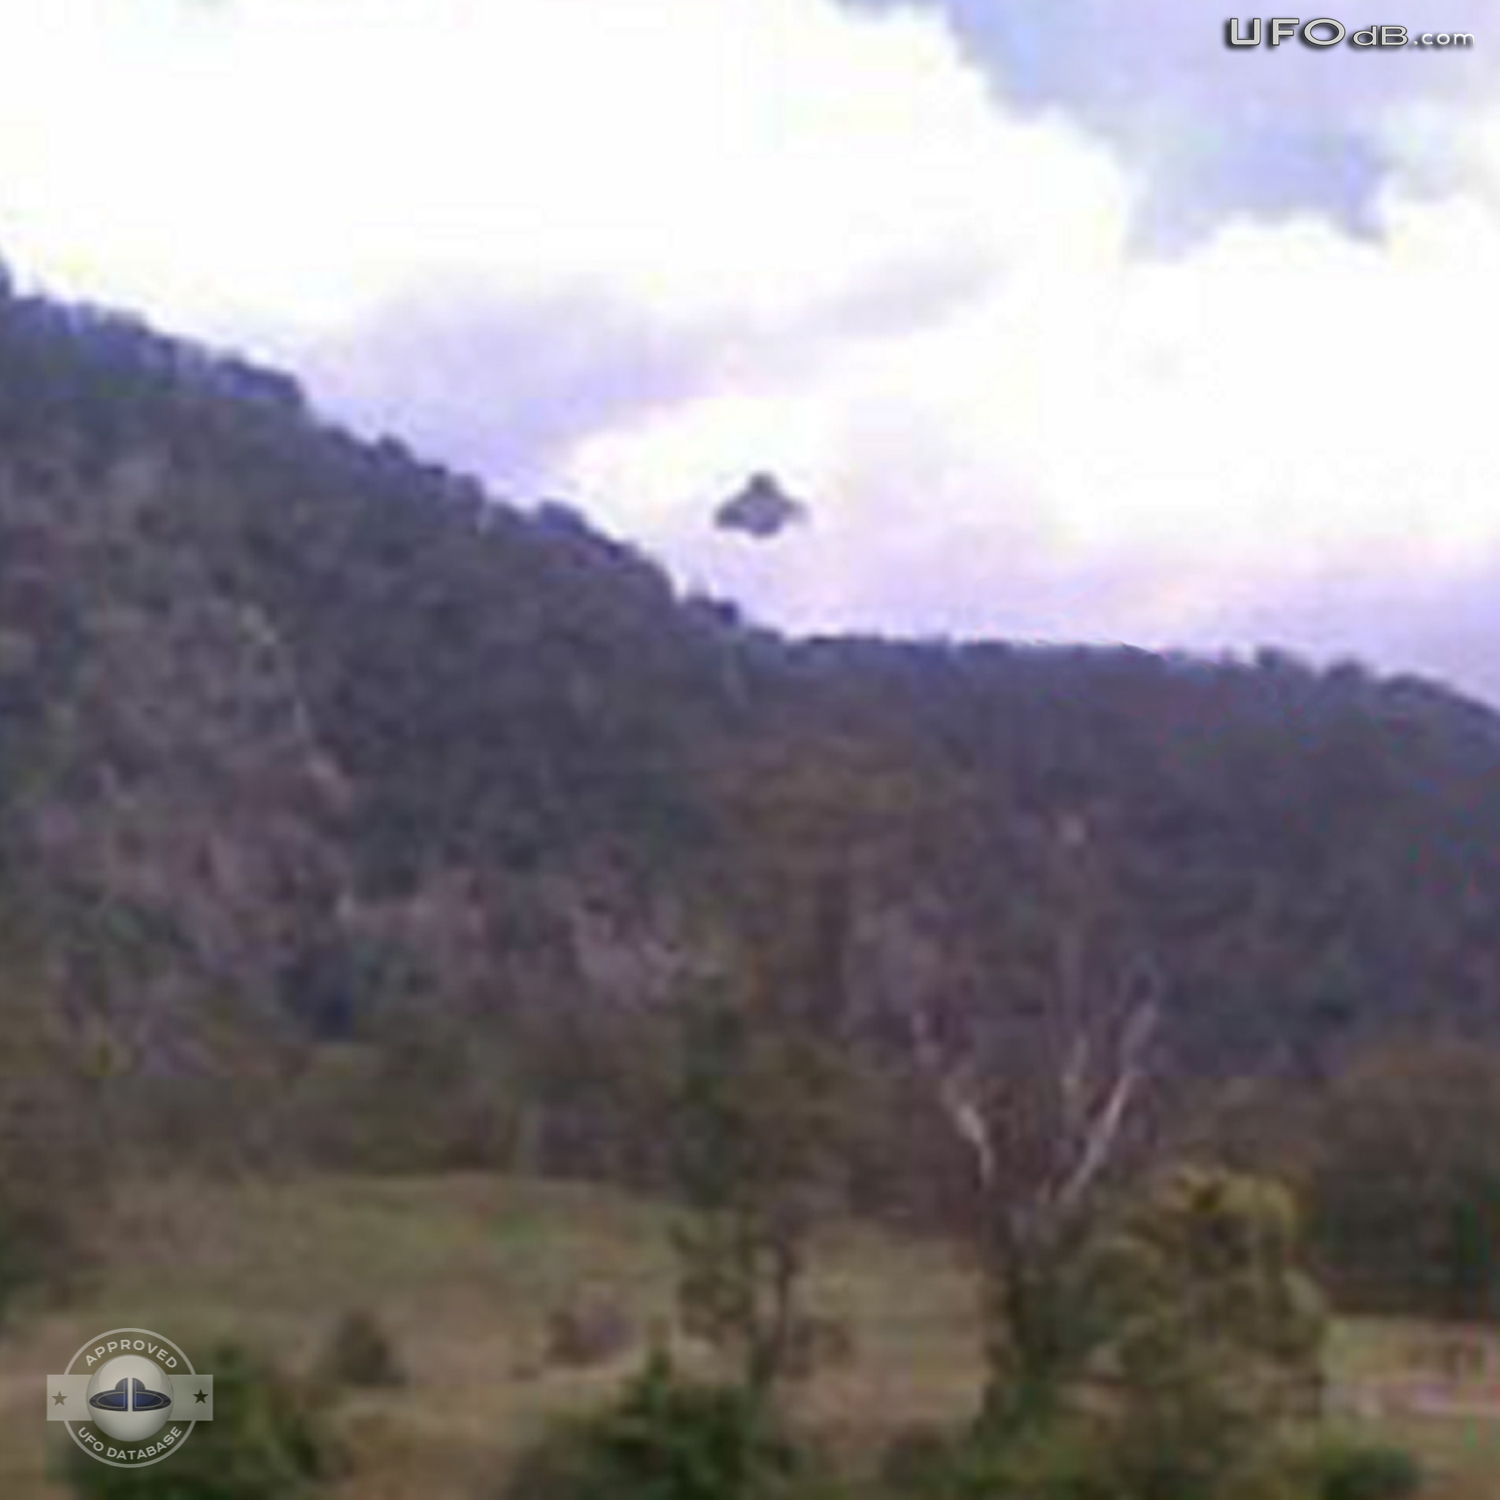 Australian Gold prospector capture UFO on picture in New South Wales UFO Picture #354-2